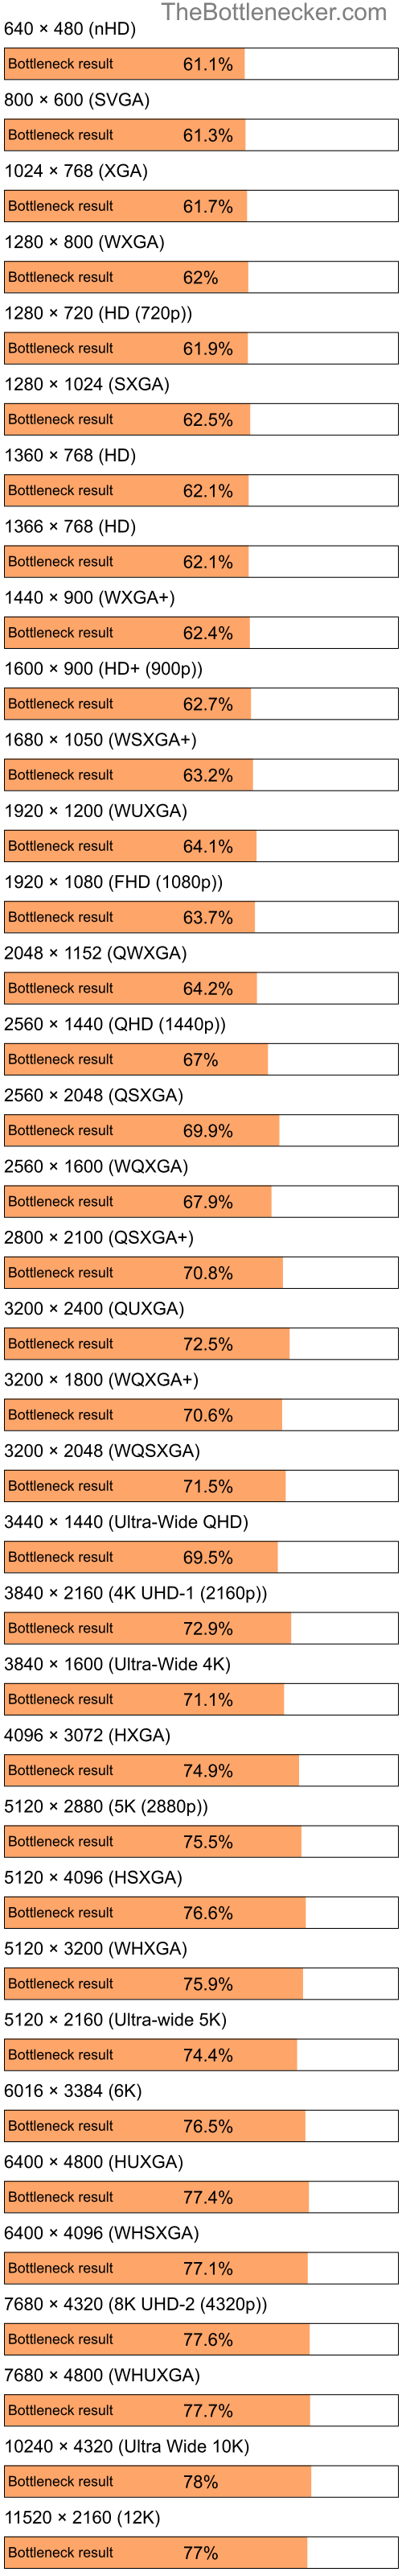 Bottleneck results by resolution for Intel Atom Z520 and AMD Mobility Radeon HD 2400 XT in General Tasks